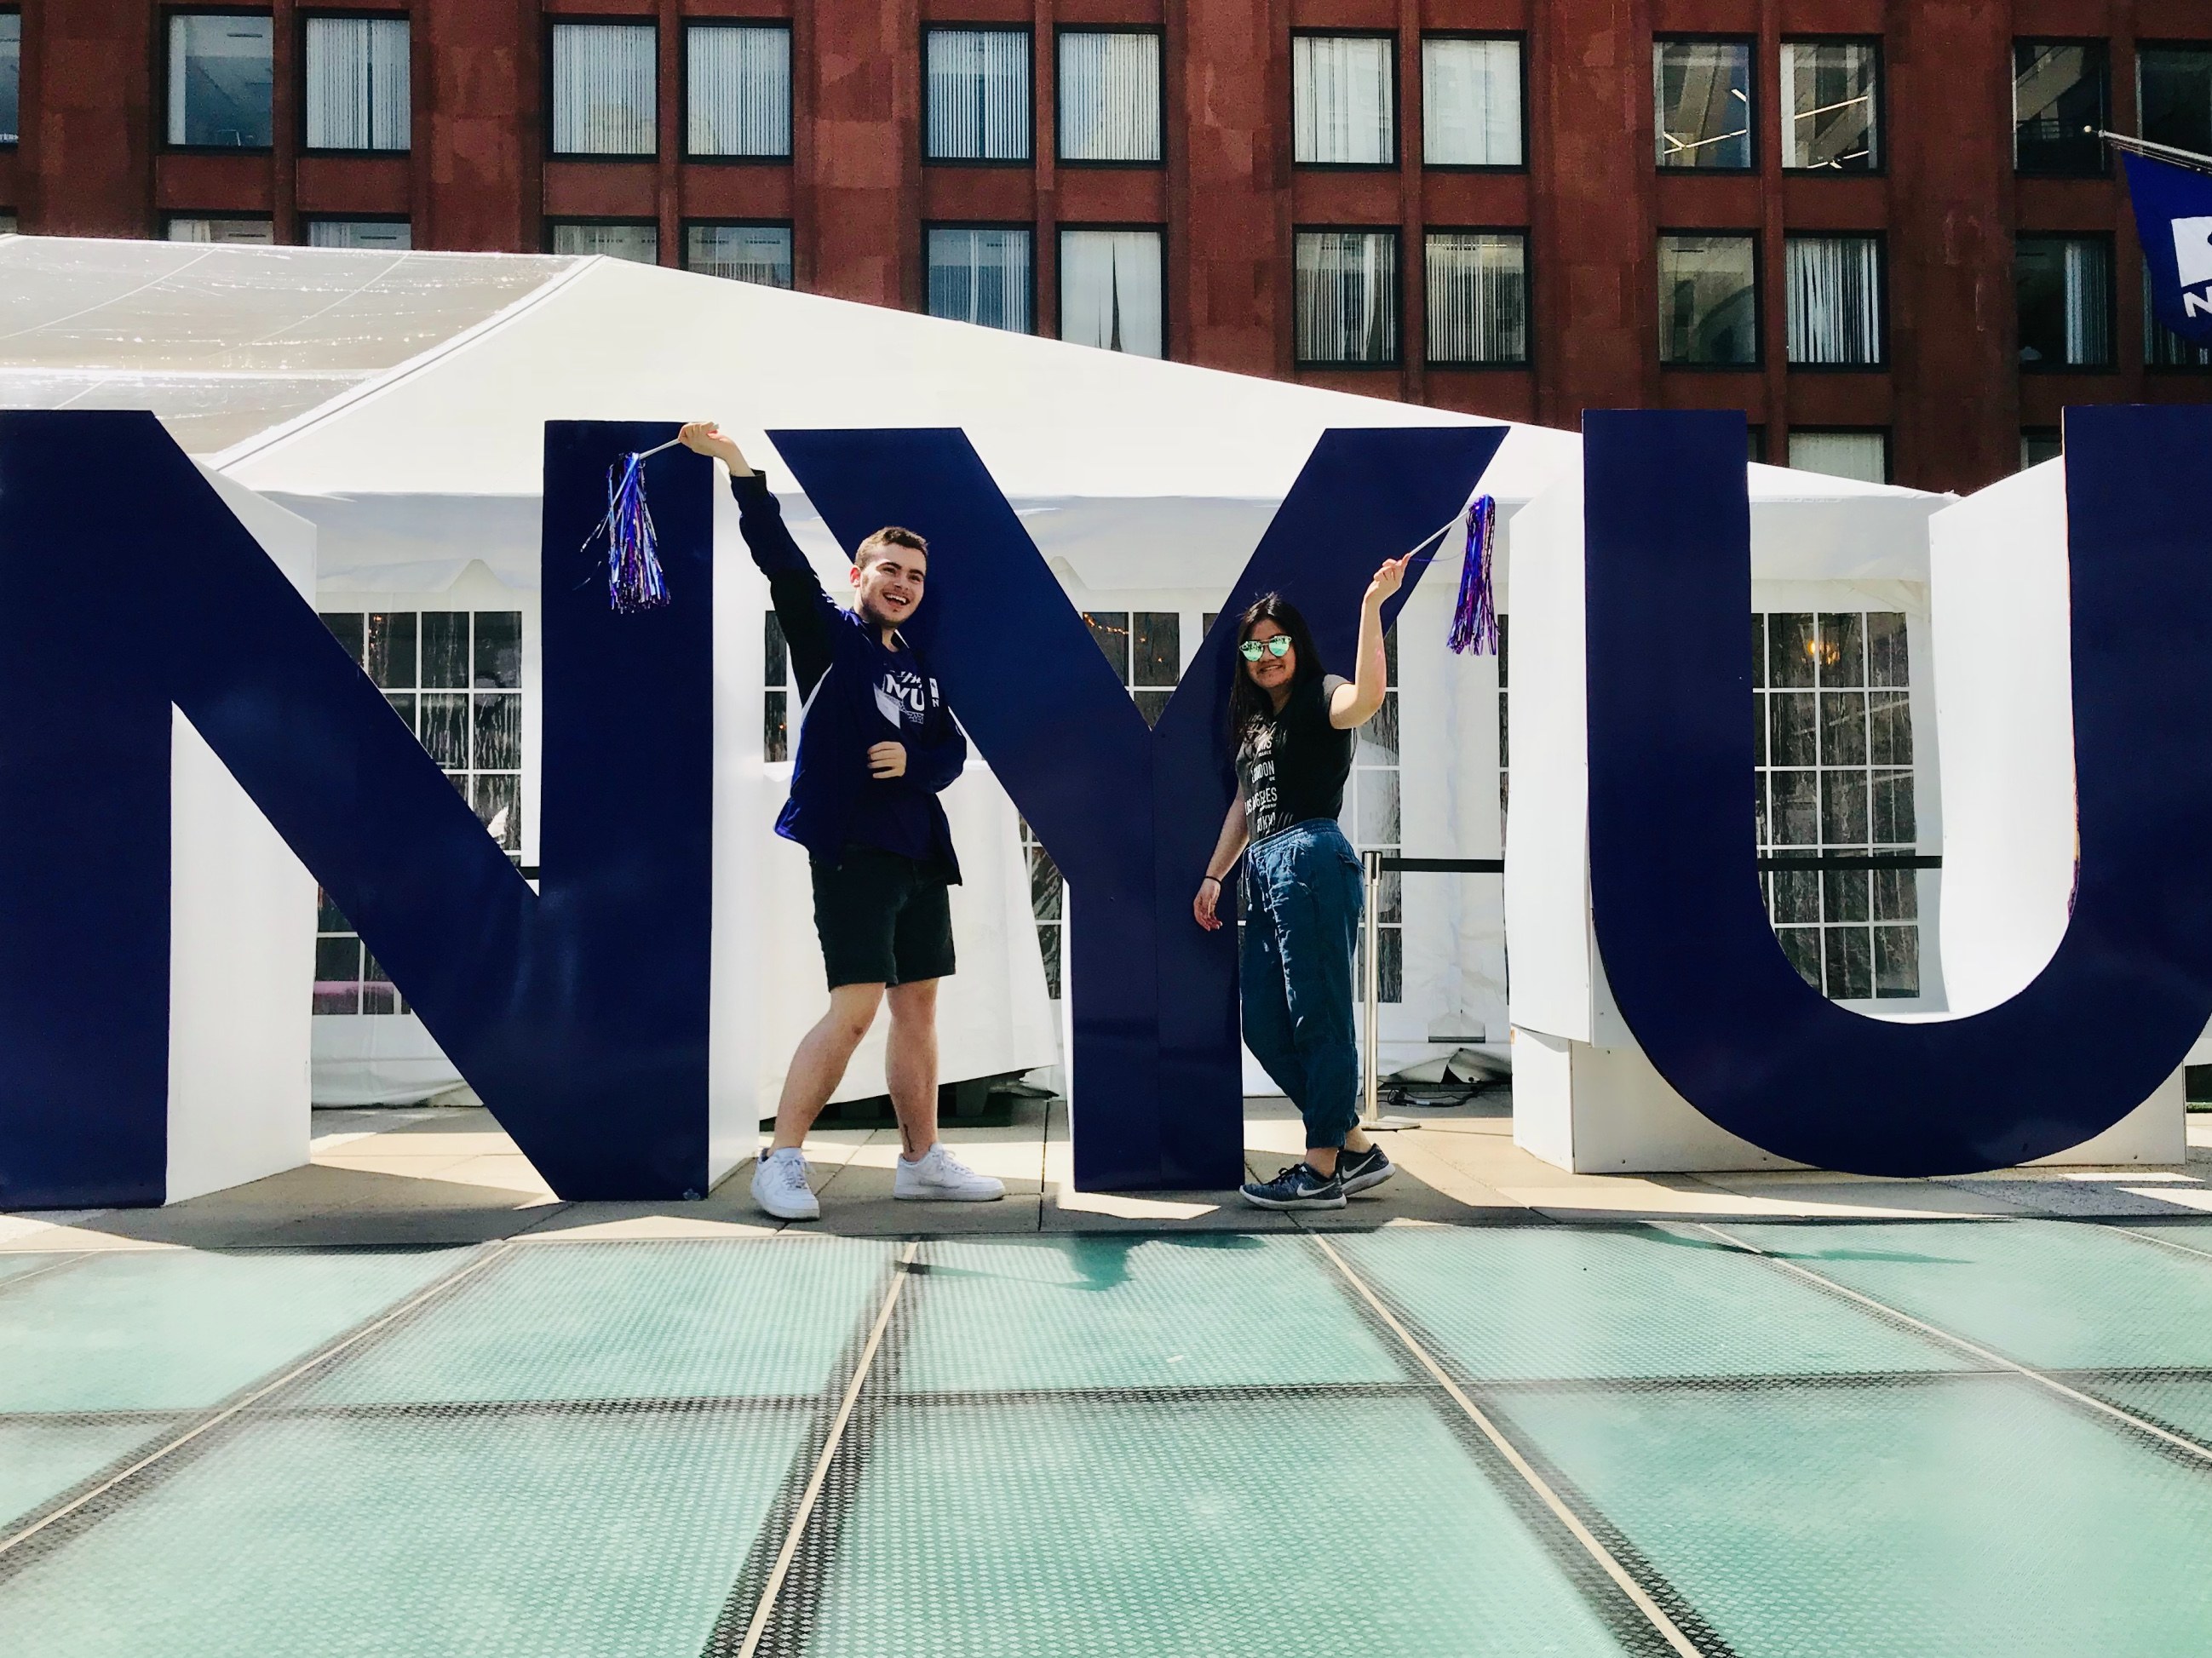 NYU students posing in front of large NYU letters.